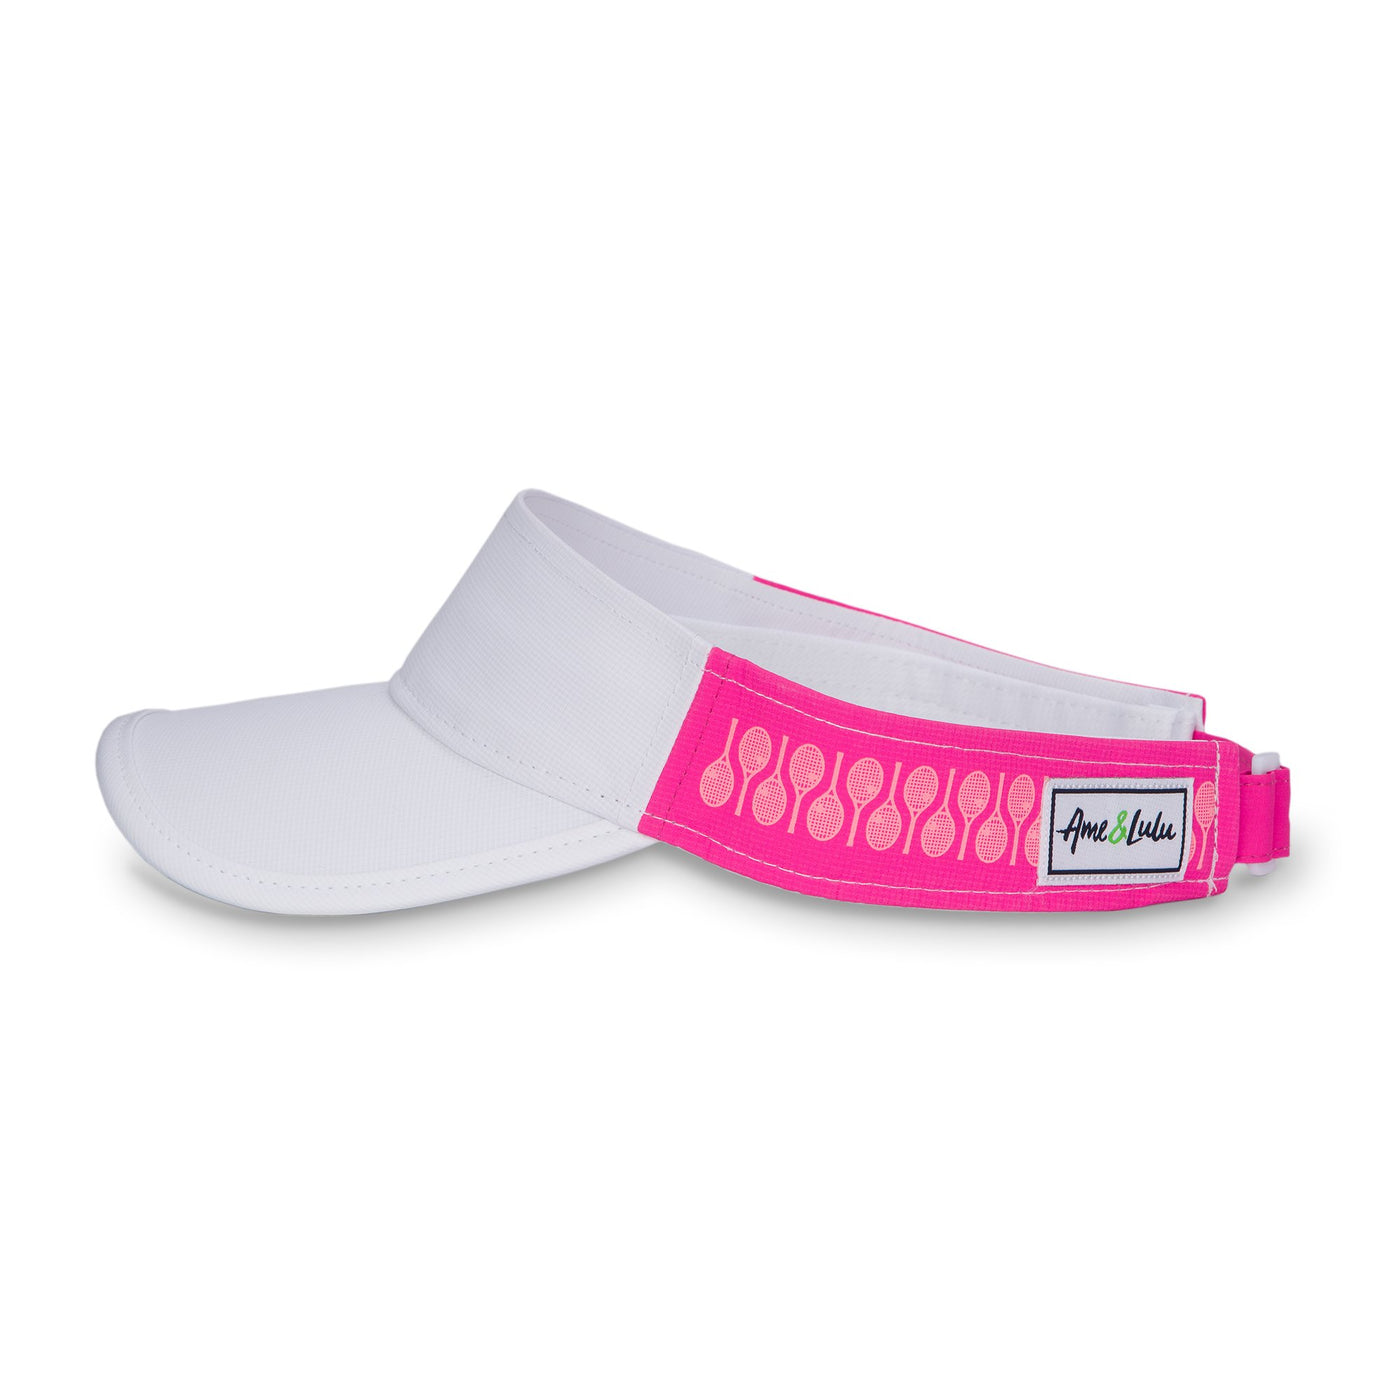 Side view of pink tonal Racquets Head in the game visor. Front of visor is white and the sides are hot pink with bright pink racquets printed.